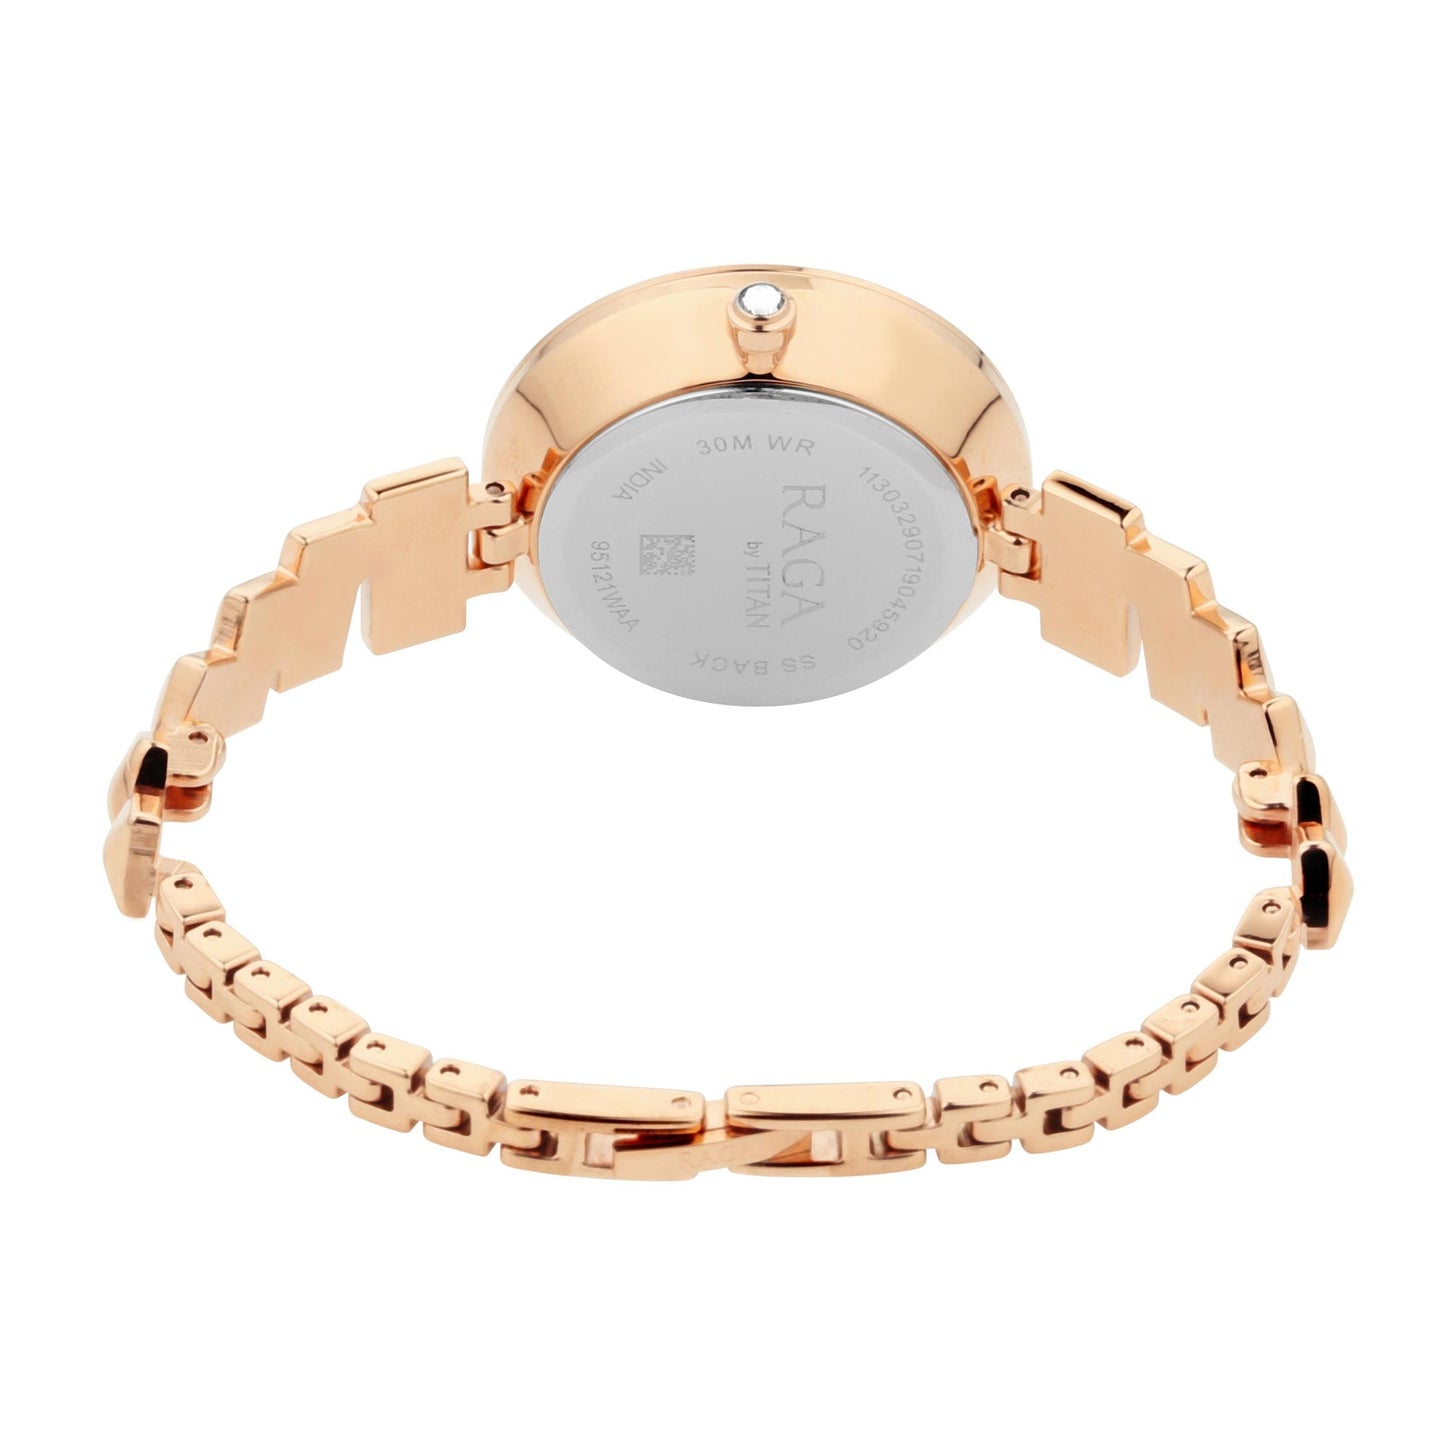 Titan Raga Facets Rose Gold Dial Women Watch With Stainless Steel Strap